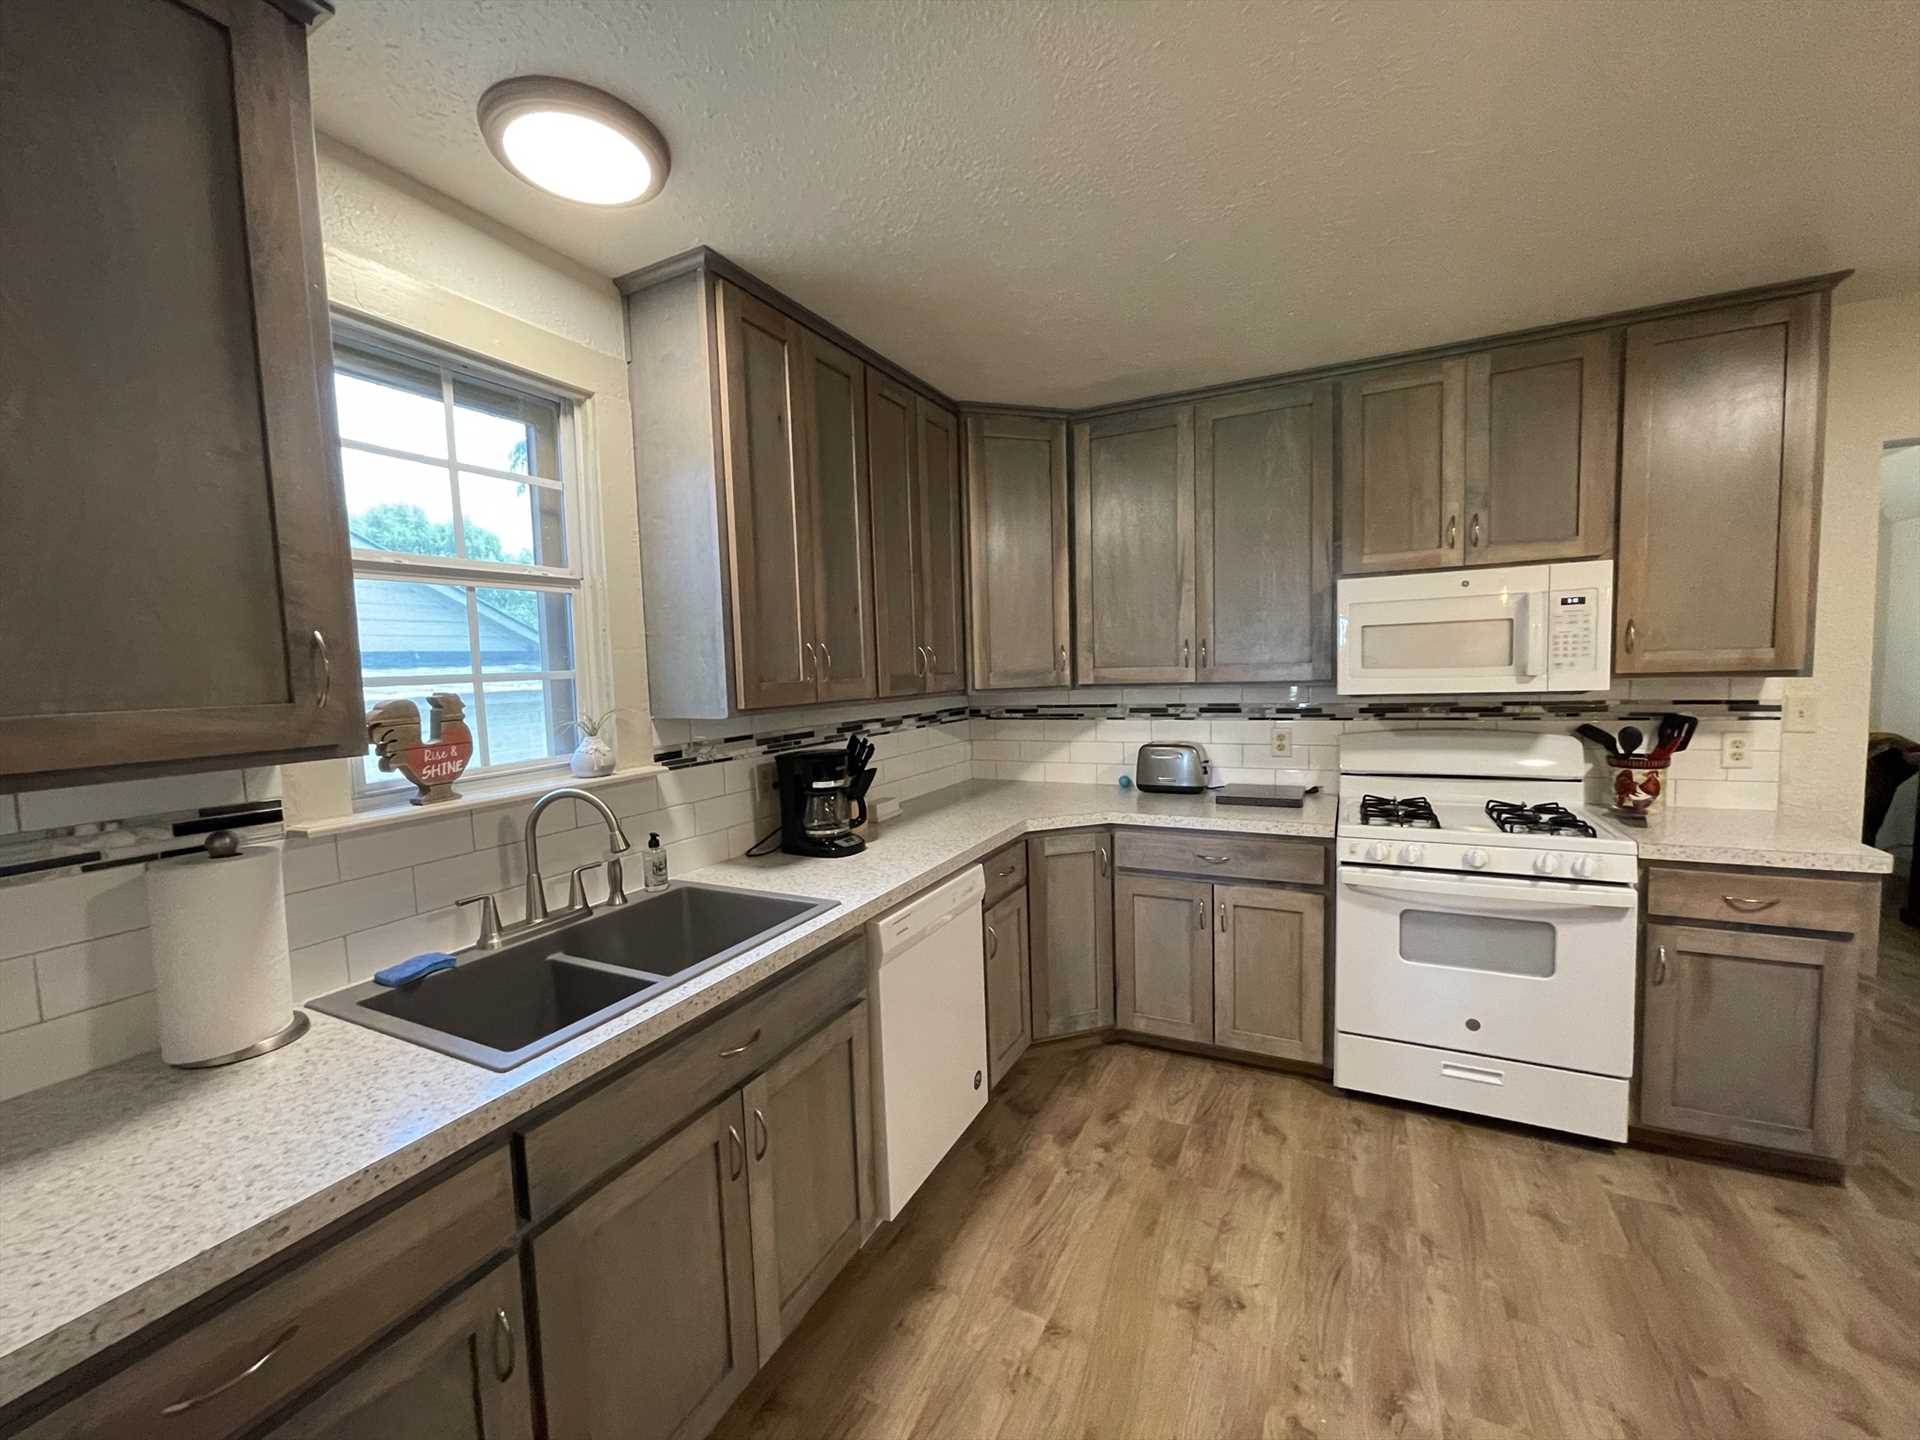                                                 Our guests rave about the modern, clean, and roomy kitchen! It's got all the appliances, cooking ware, utensils, and serving ware you'll need for a great family feast.